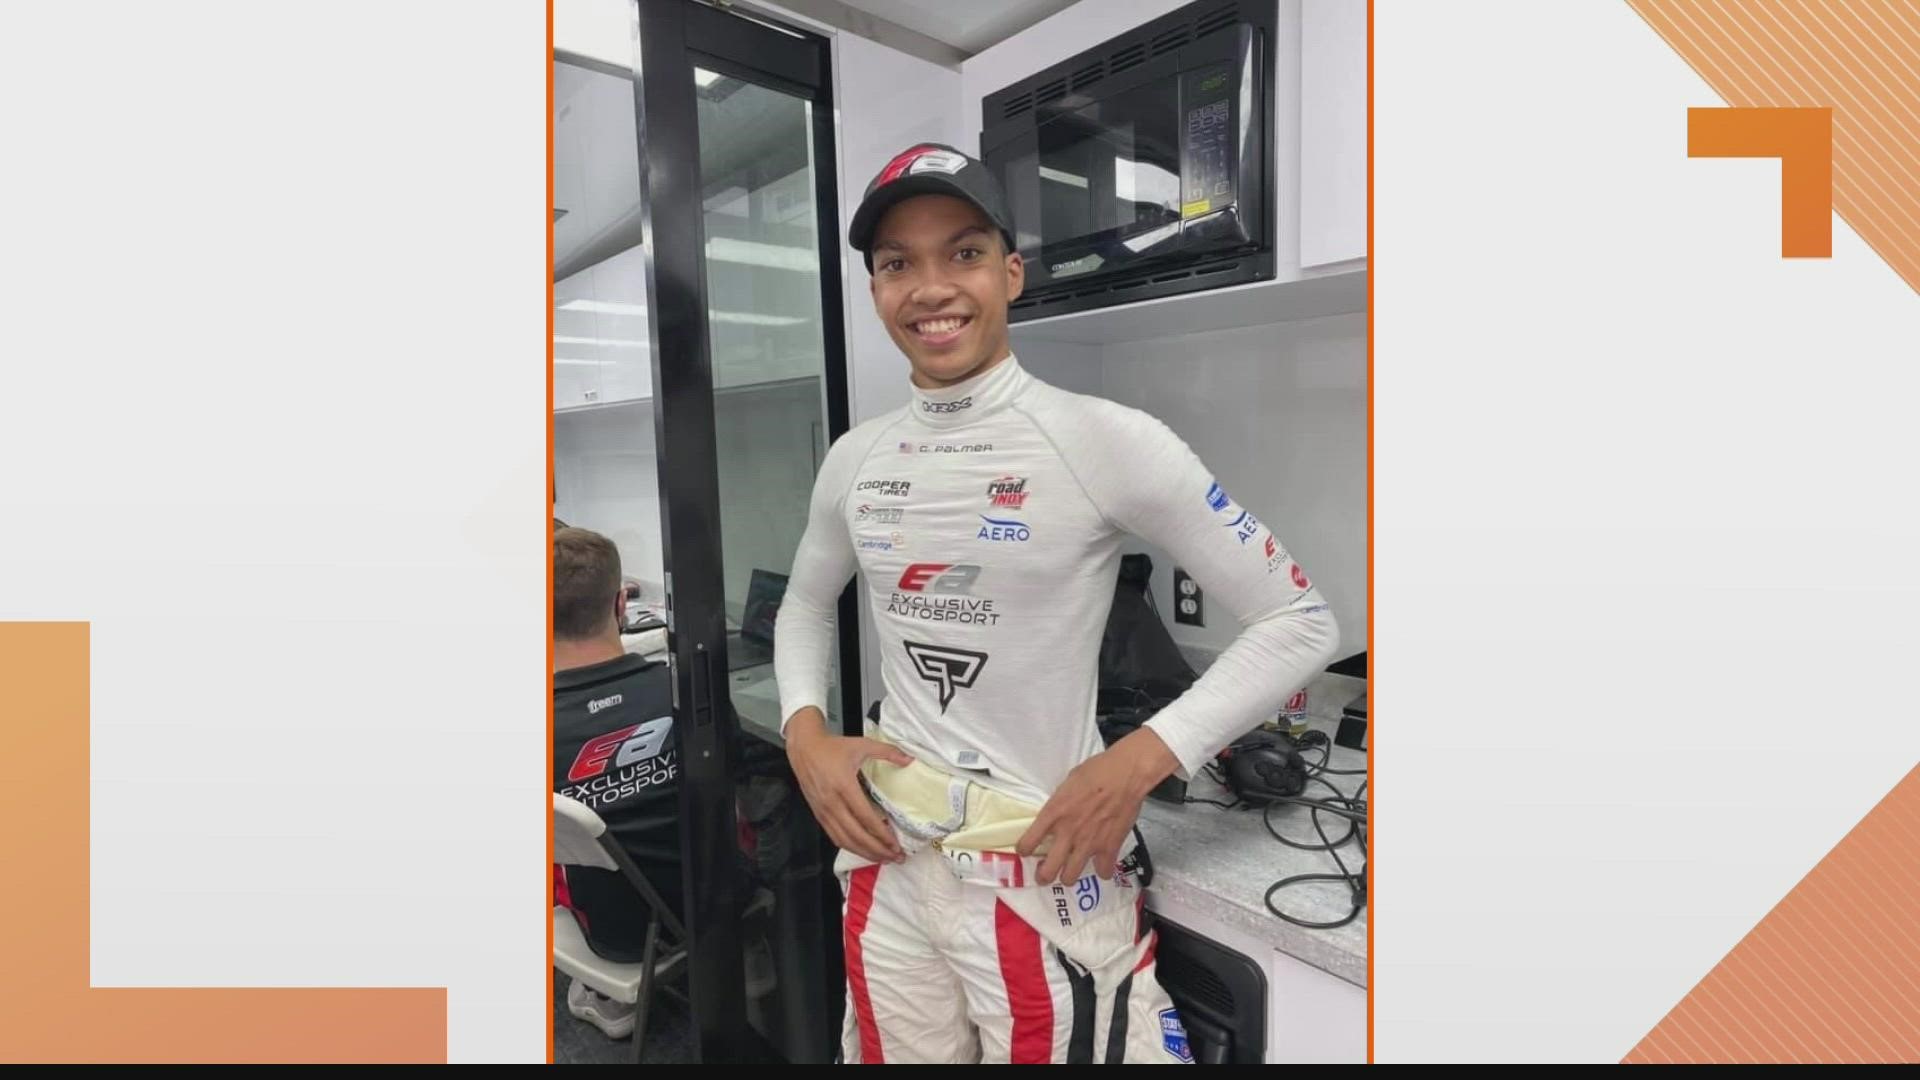 A St. Charles man needs your help to raise sponsorship money to make it in the Indy circuit with hopes to become the first Black driver to win the 500